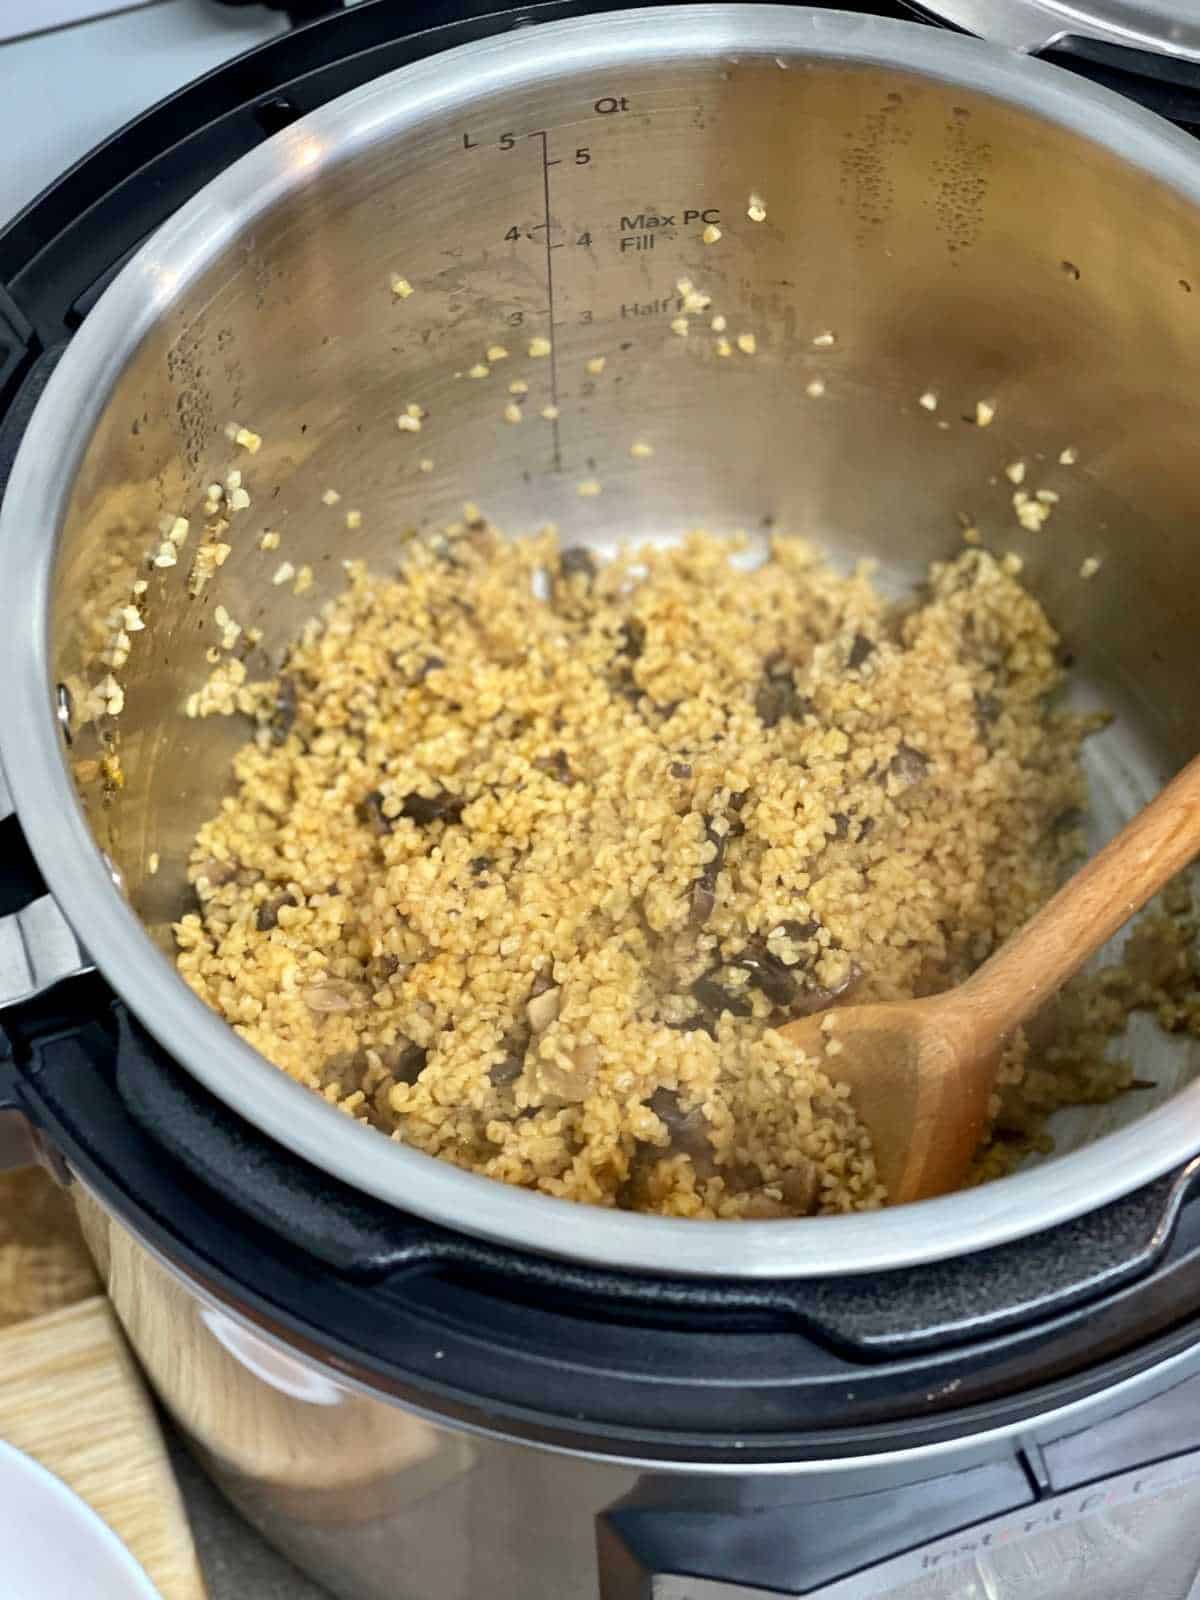 Pressure cooked mushroom bulgur wheat seen from above in Instant Pot Duo Evo Plus - with a wooden spoon on the side